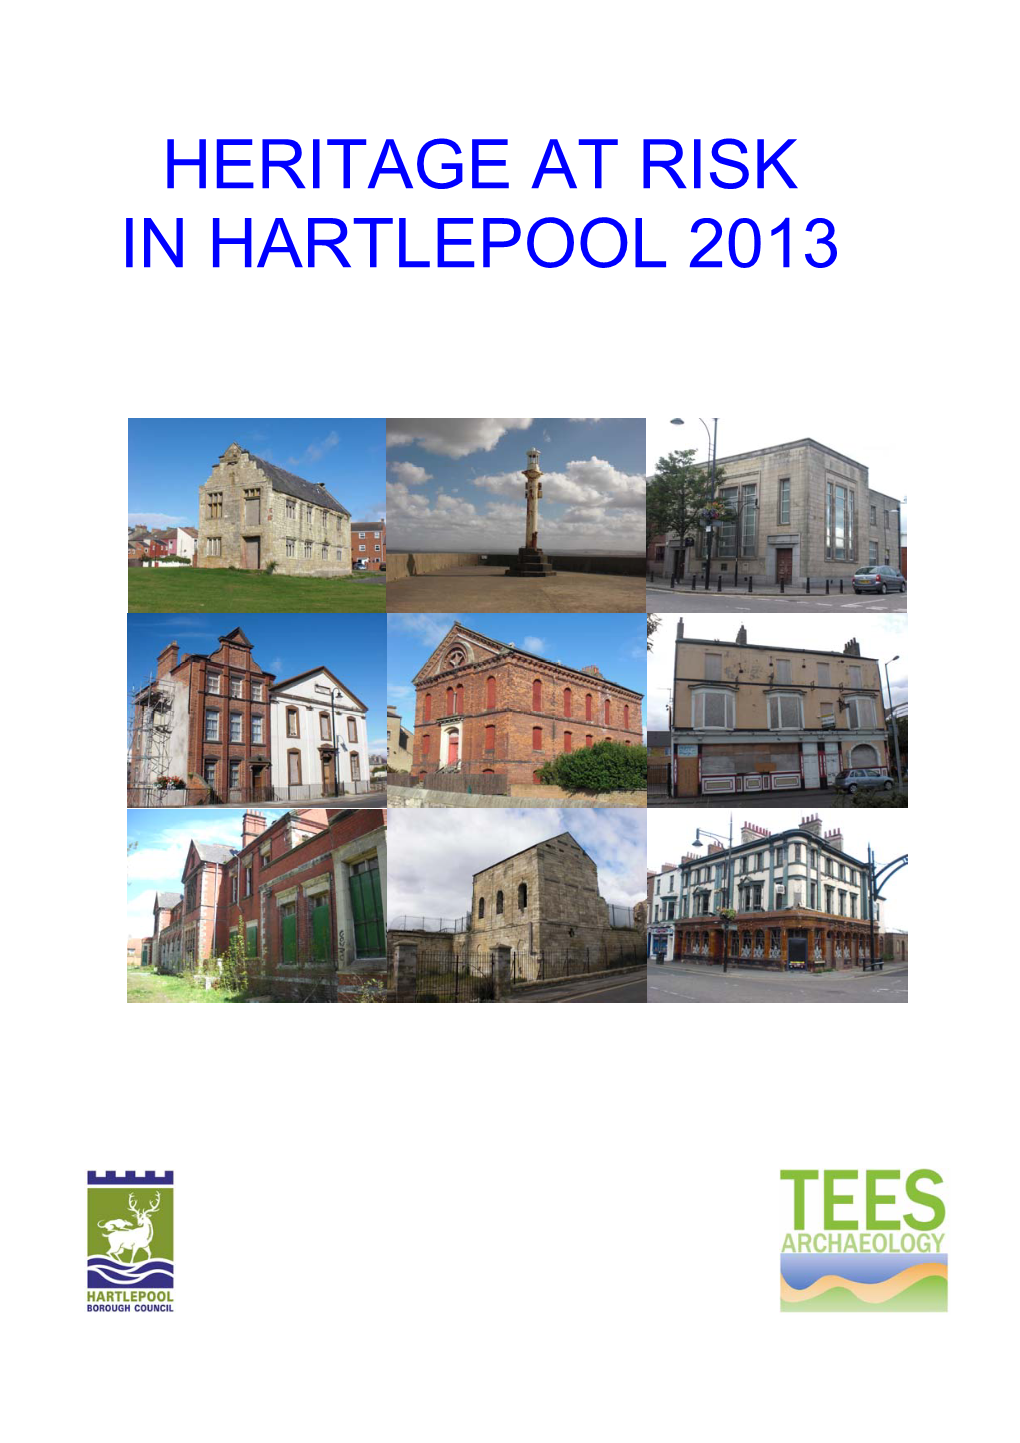 Heritage at Risk in Hartlepool 2013